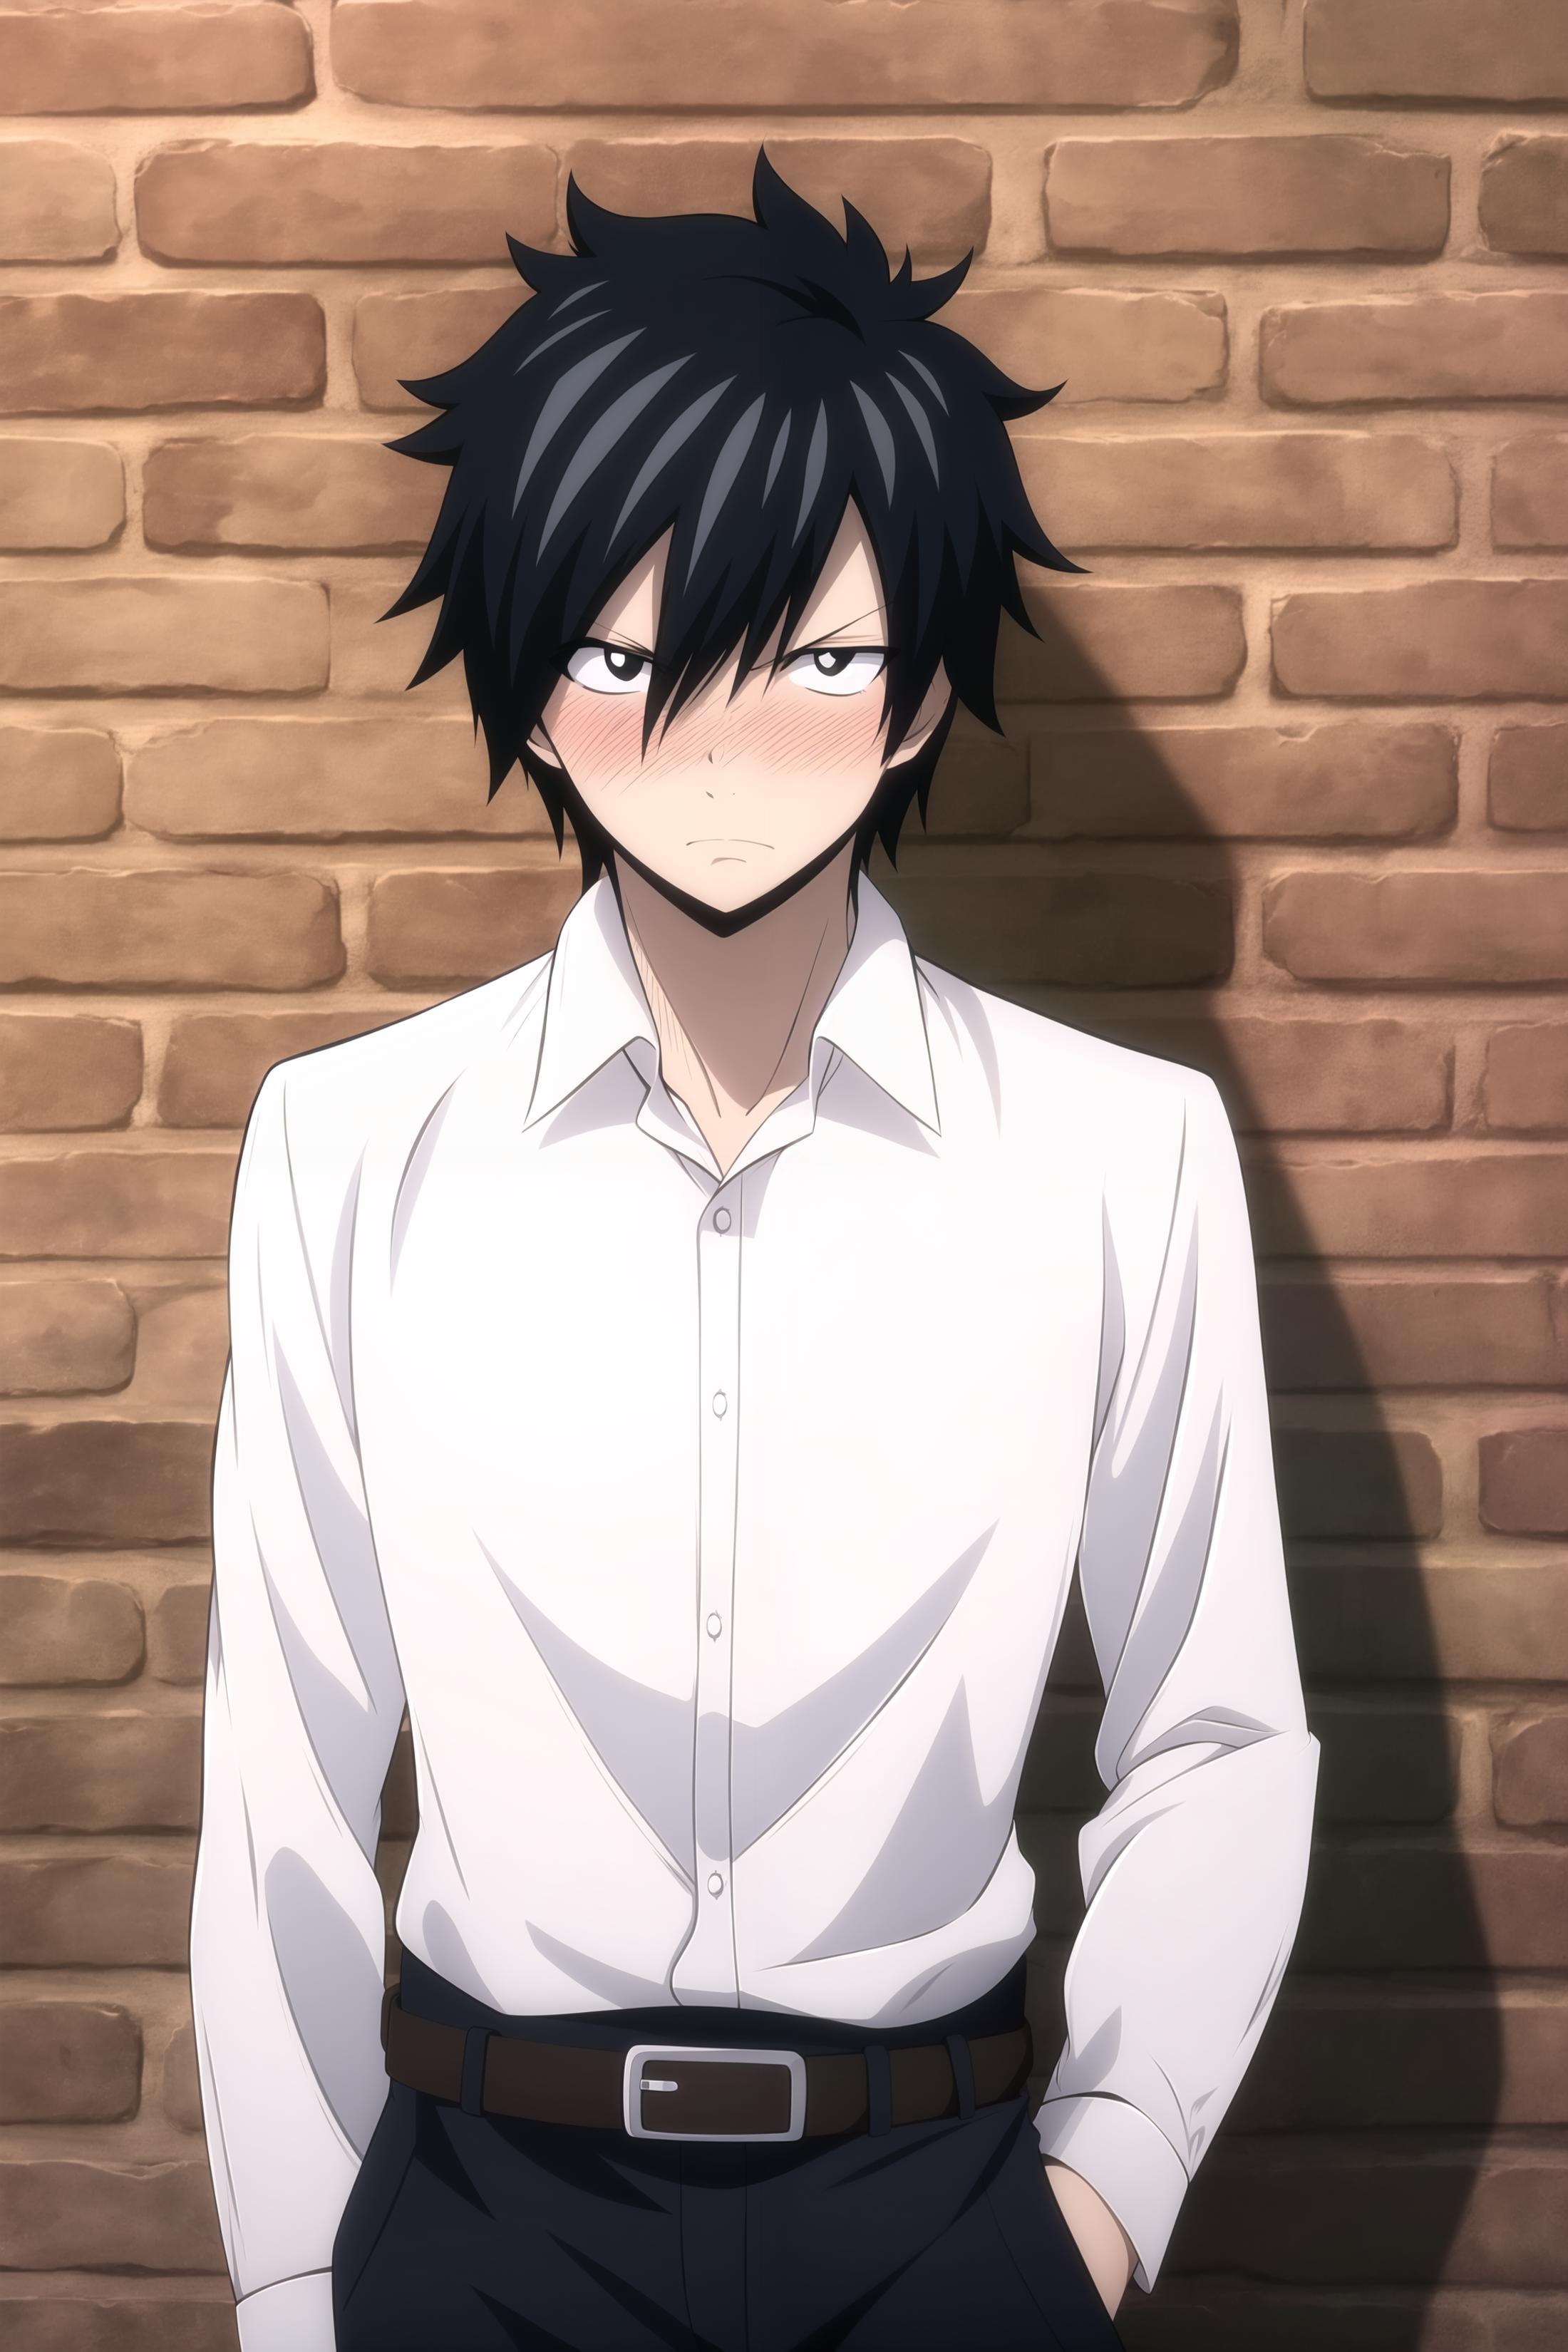 Gray Fullbuster / Fairy Tail image by mrtanooki